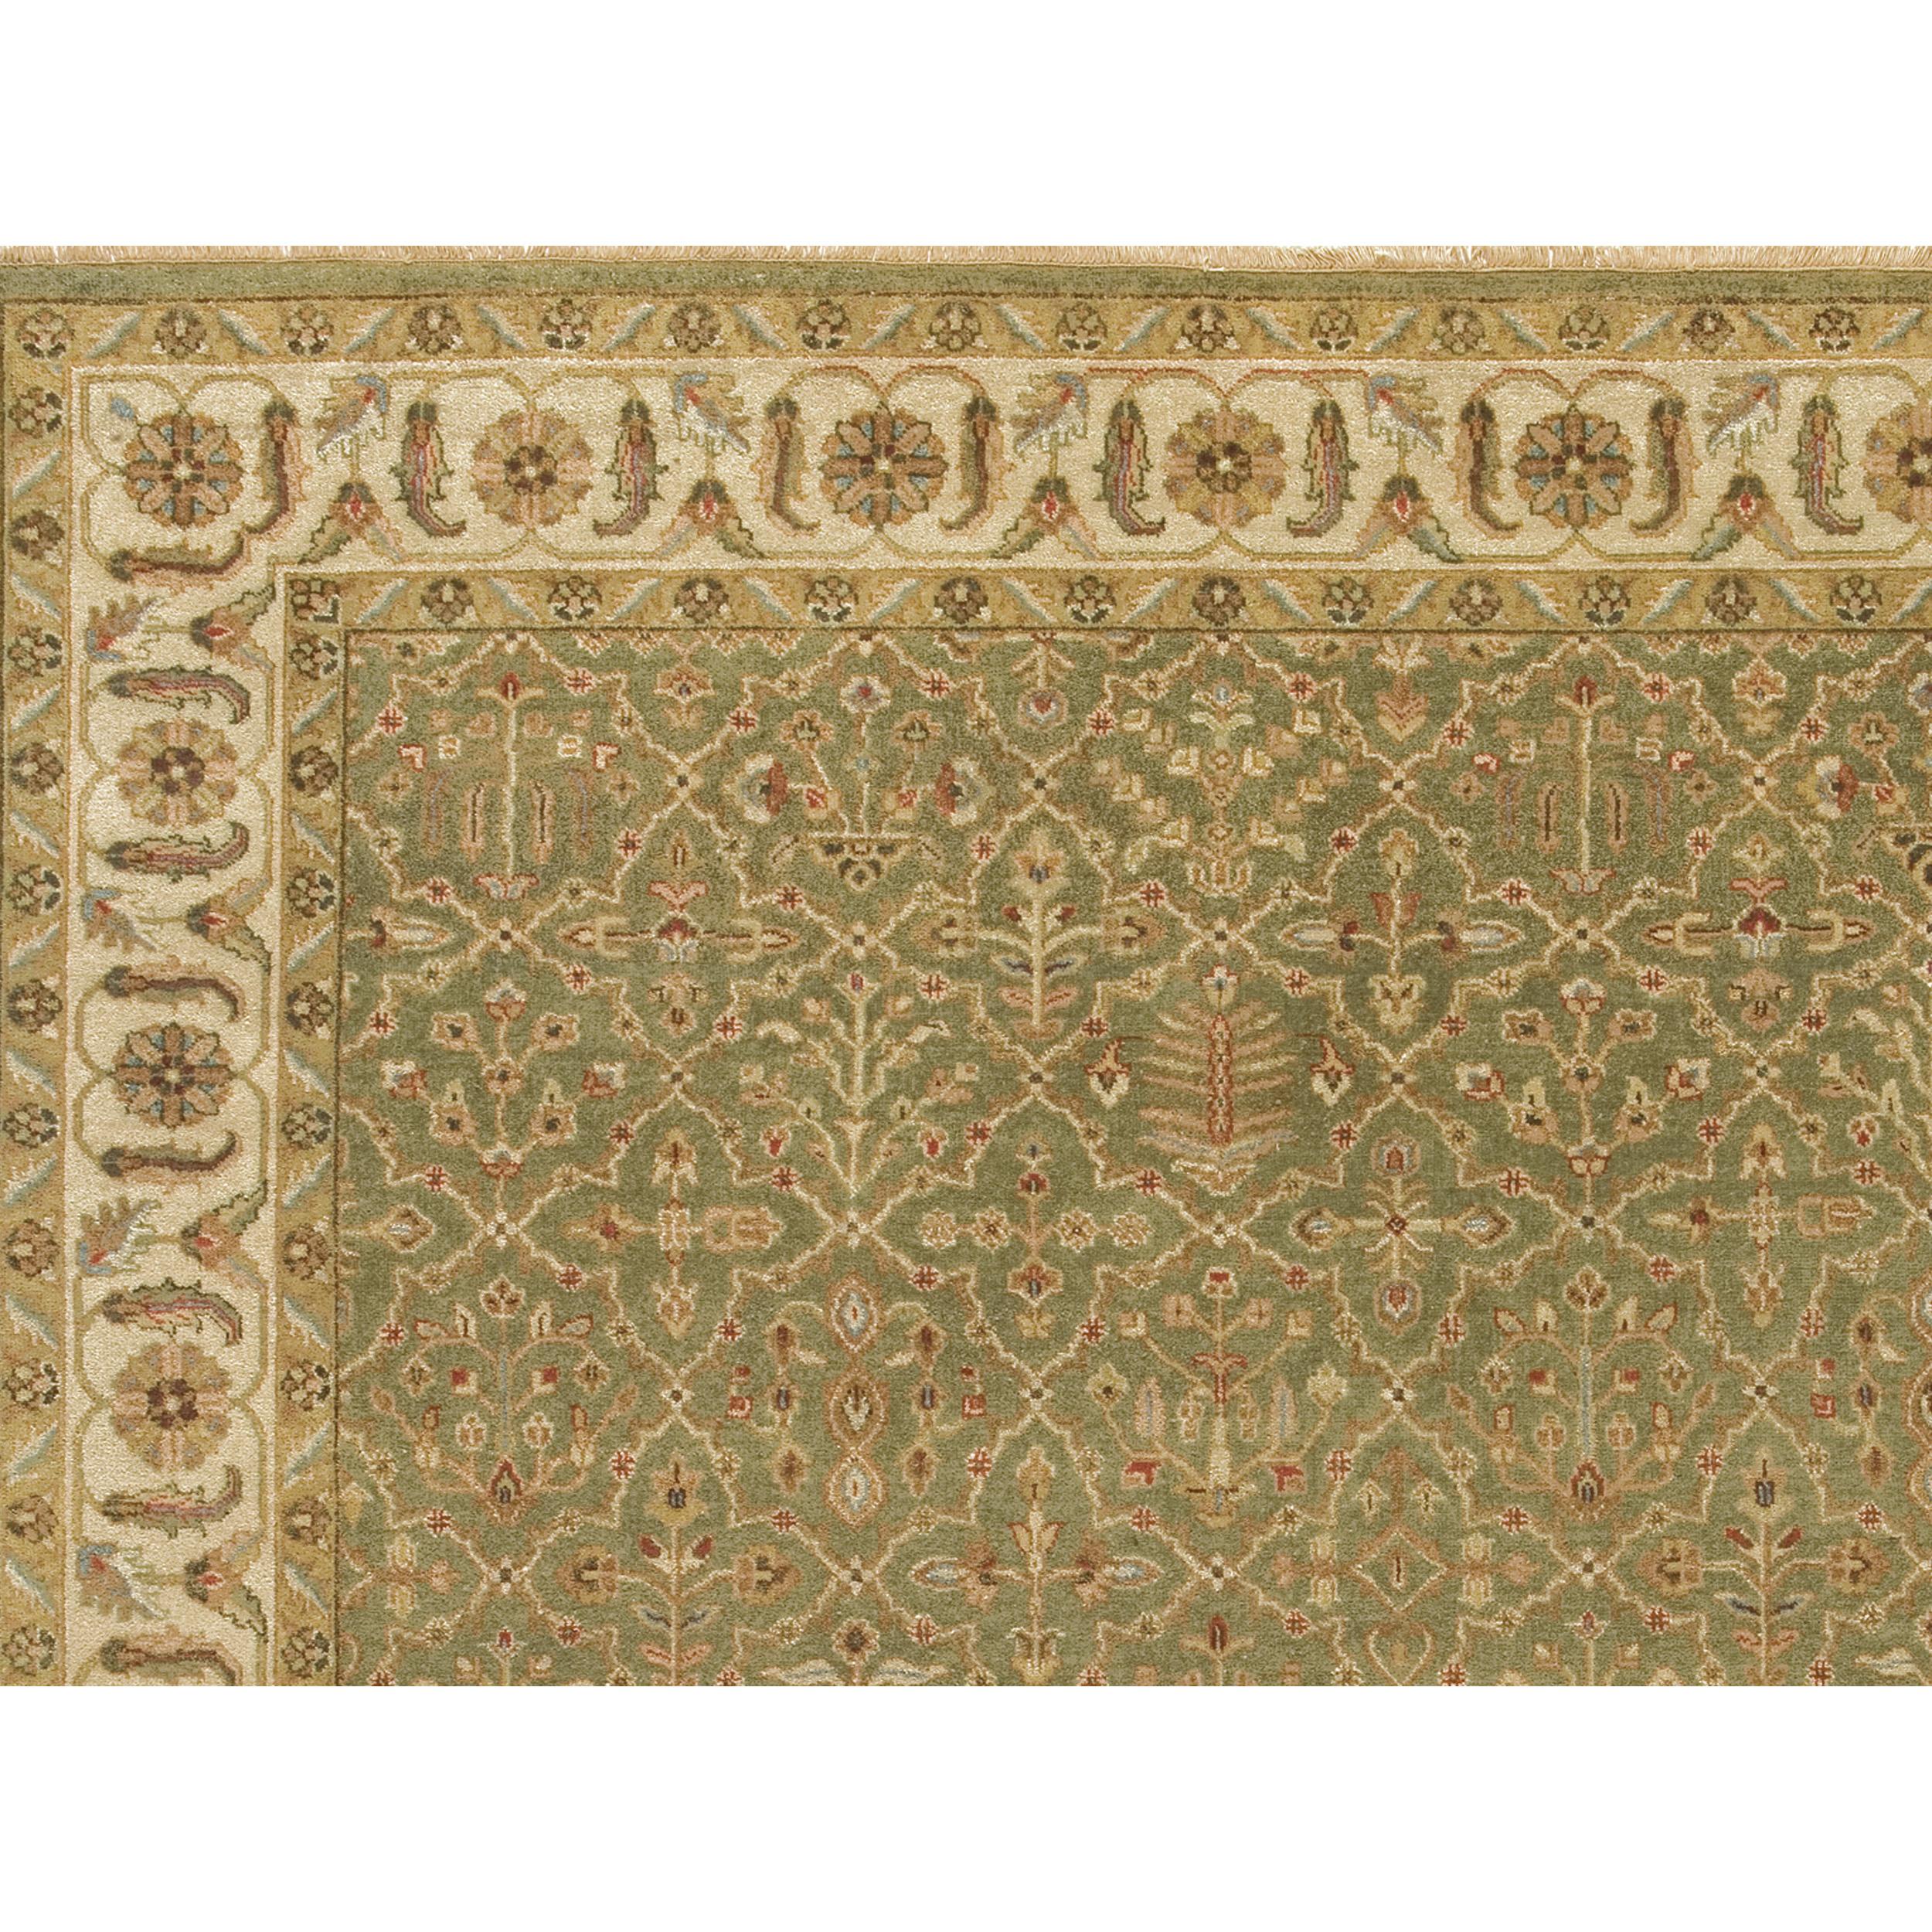 Luxury Traditional Hand-Knotted Bakhtiari Green and Ivory 11x19 Rug In New Condition For Sale In Secaucus, NJ